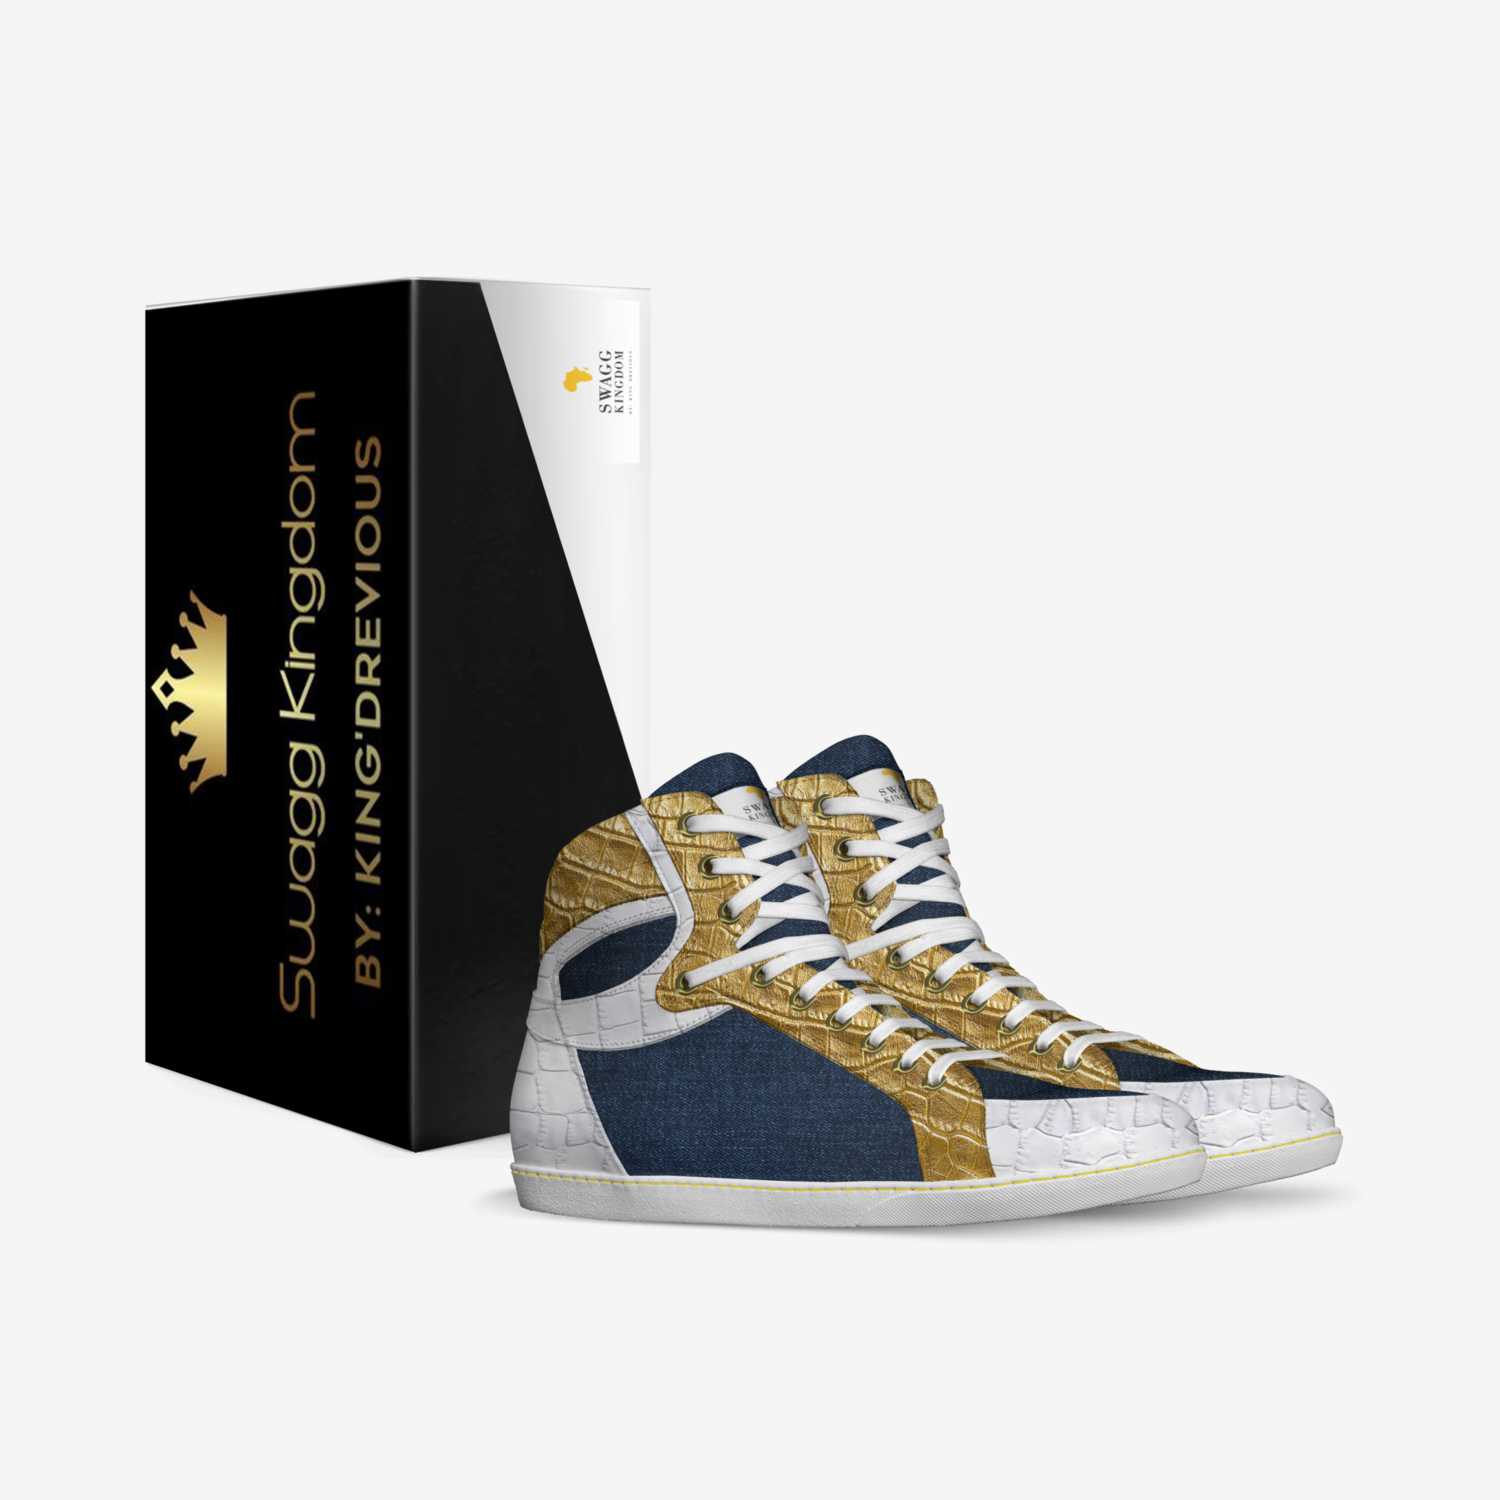 SWAGGR custom made in Italy shoes by Aundra "king'Drevious" Grimes-jones | Box view